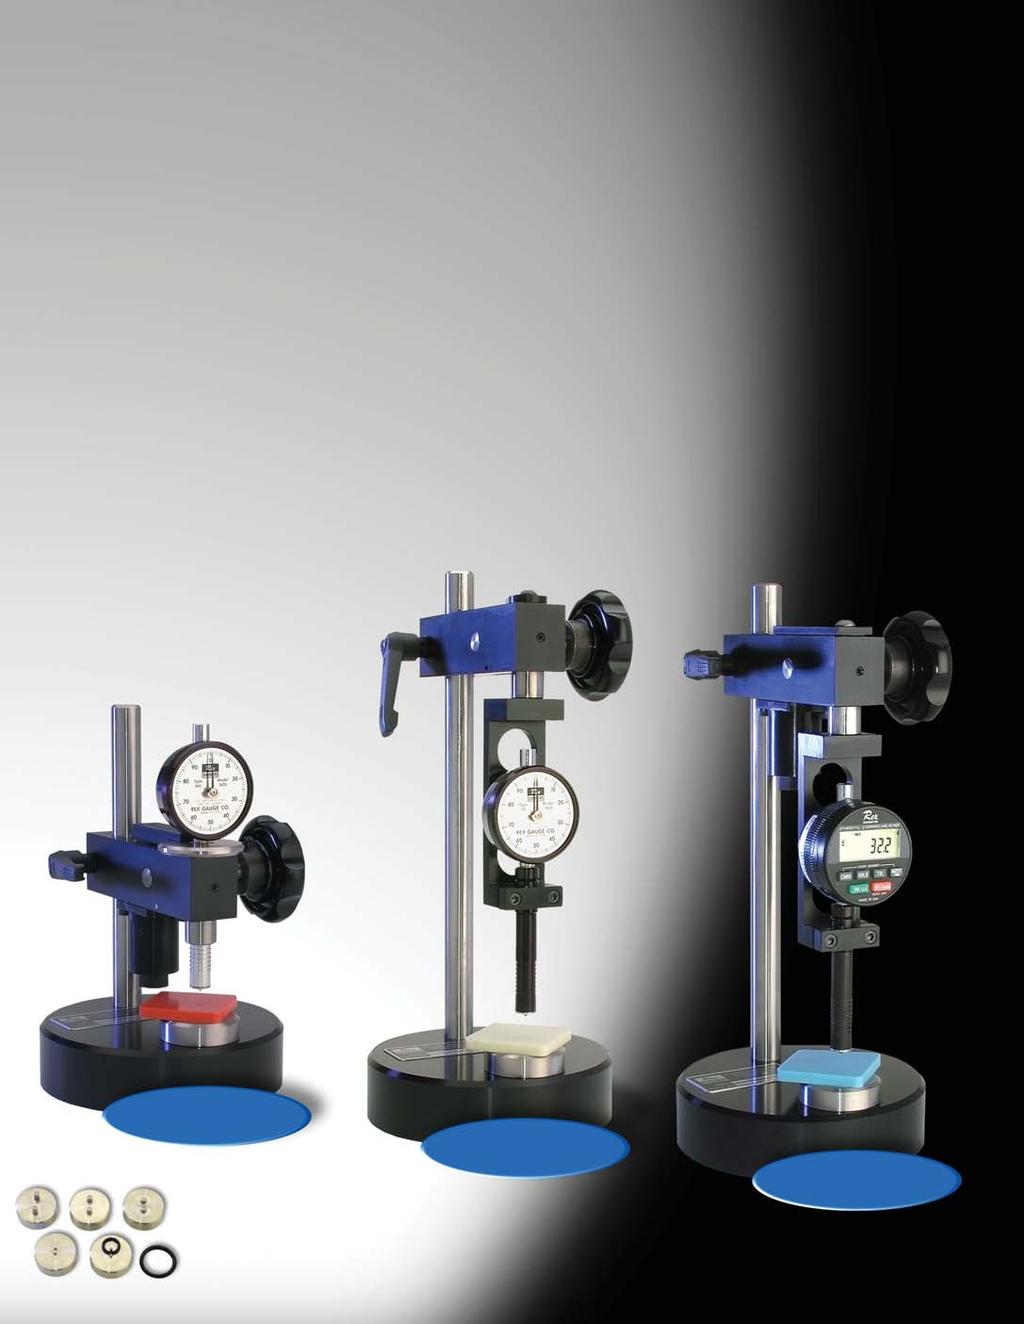 The OS-2 and OS-4 Operating Stands Smaller versions of the OS-1 stand, the OS-2 and OS-4 provide a convenient and accurate way to perform repeated hardness tests.